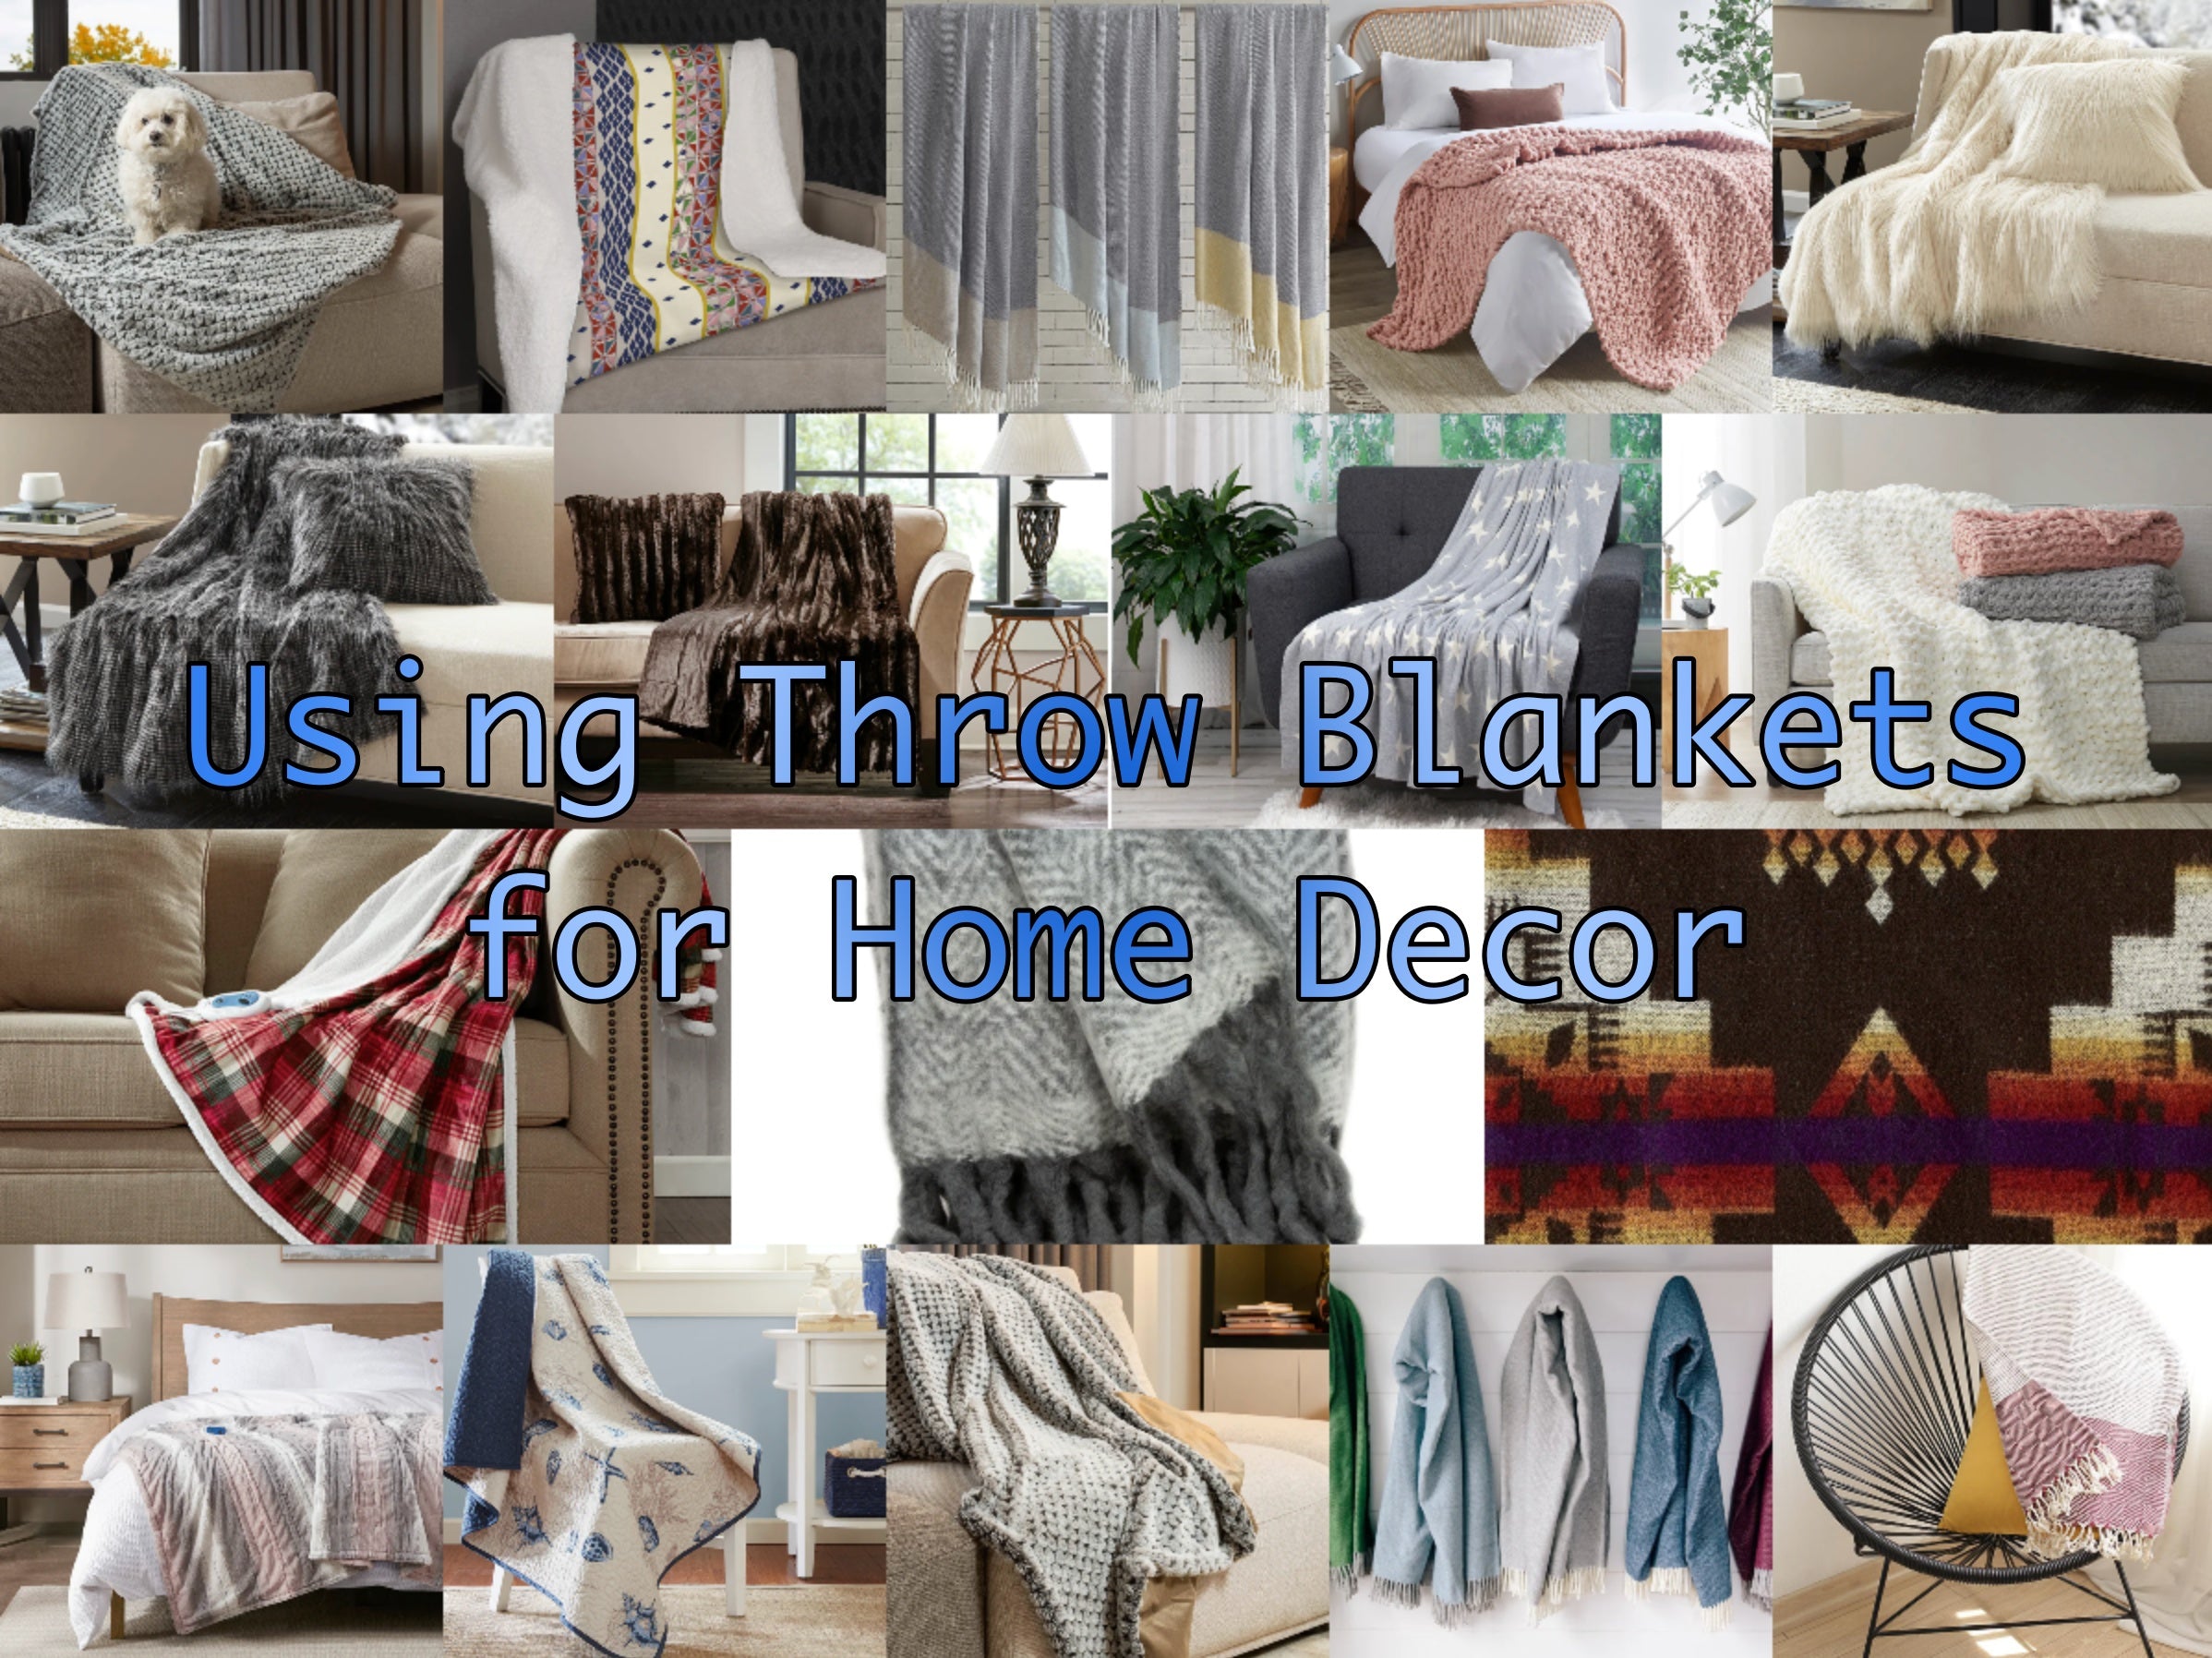 Using Throw Blankets for Home Decor